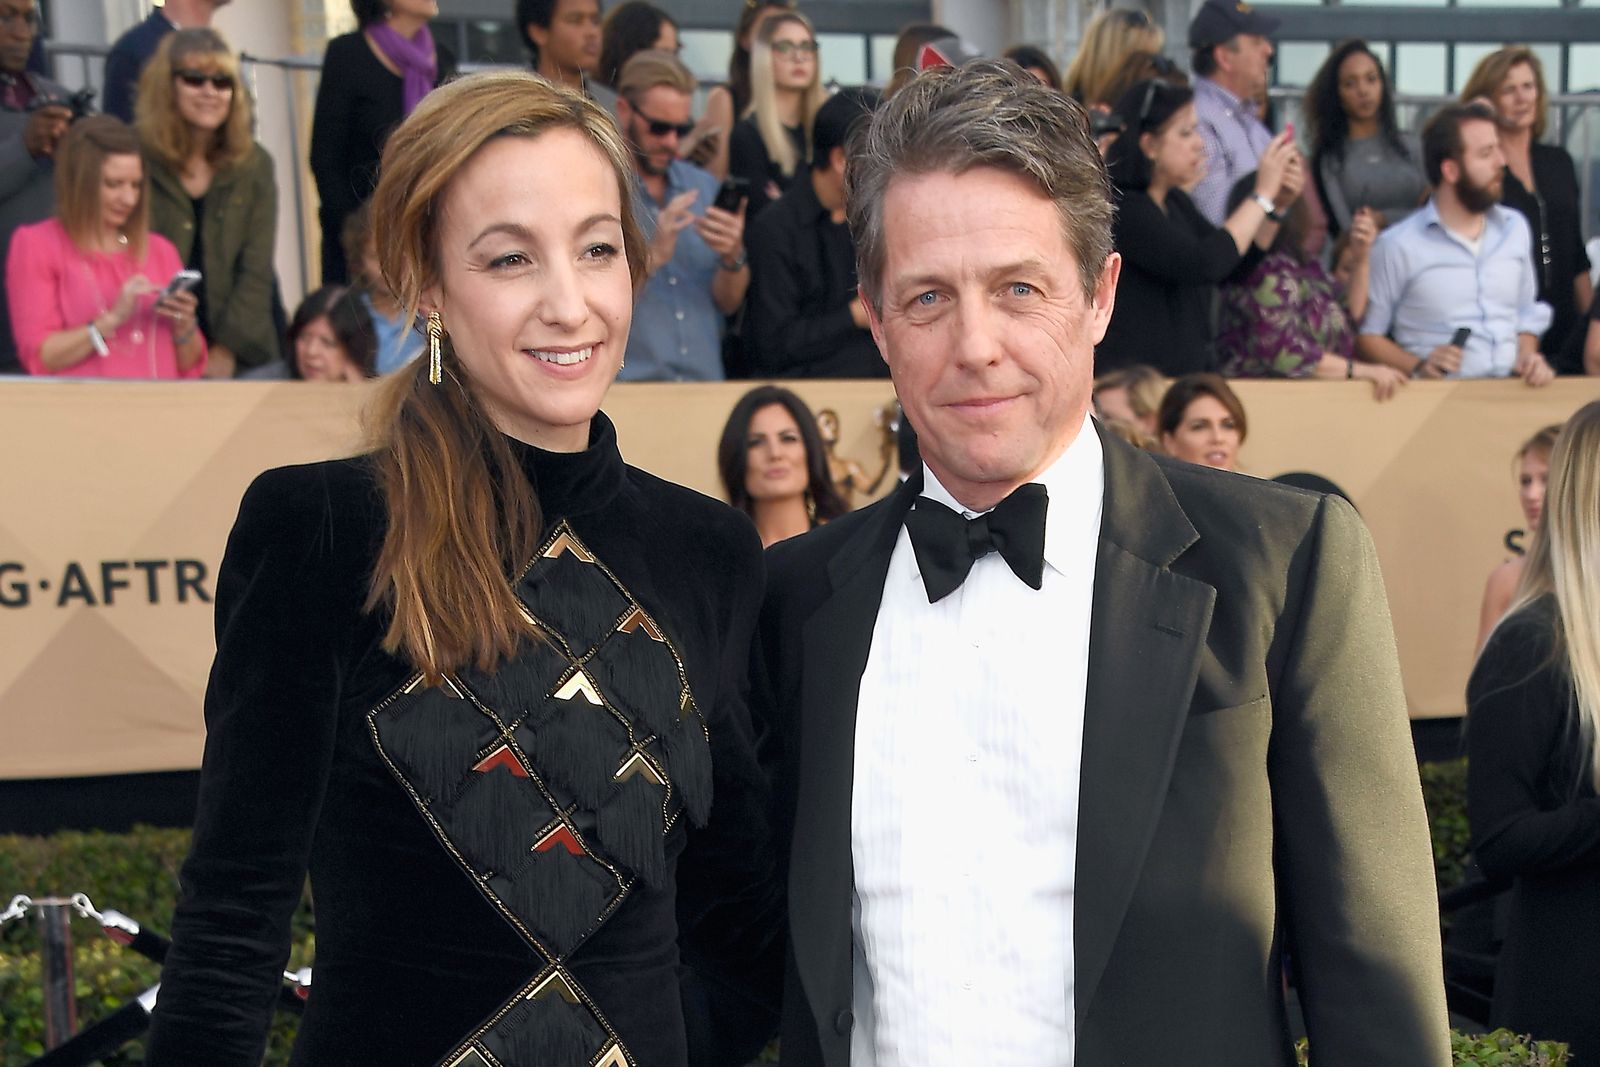 Anna Eberstein and actor Hugh Grant at The 23rd Annual Screen Actors Guild Awards at The Shrine Auditorium on January 29, 2017 | Photo: Getty Images